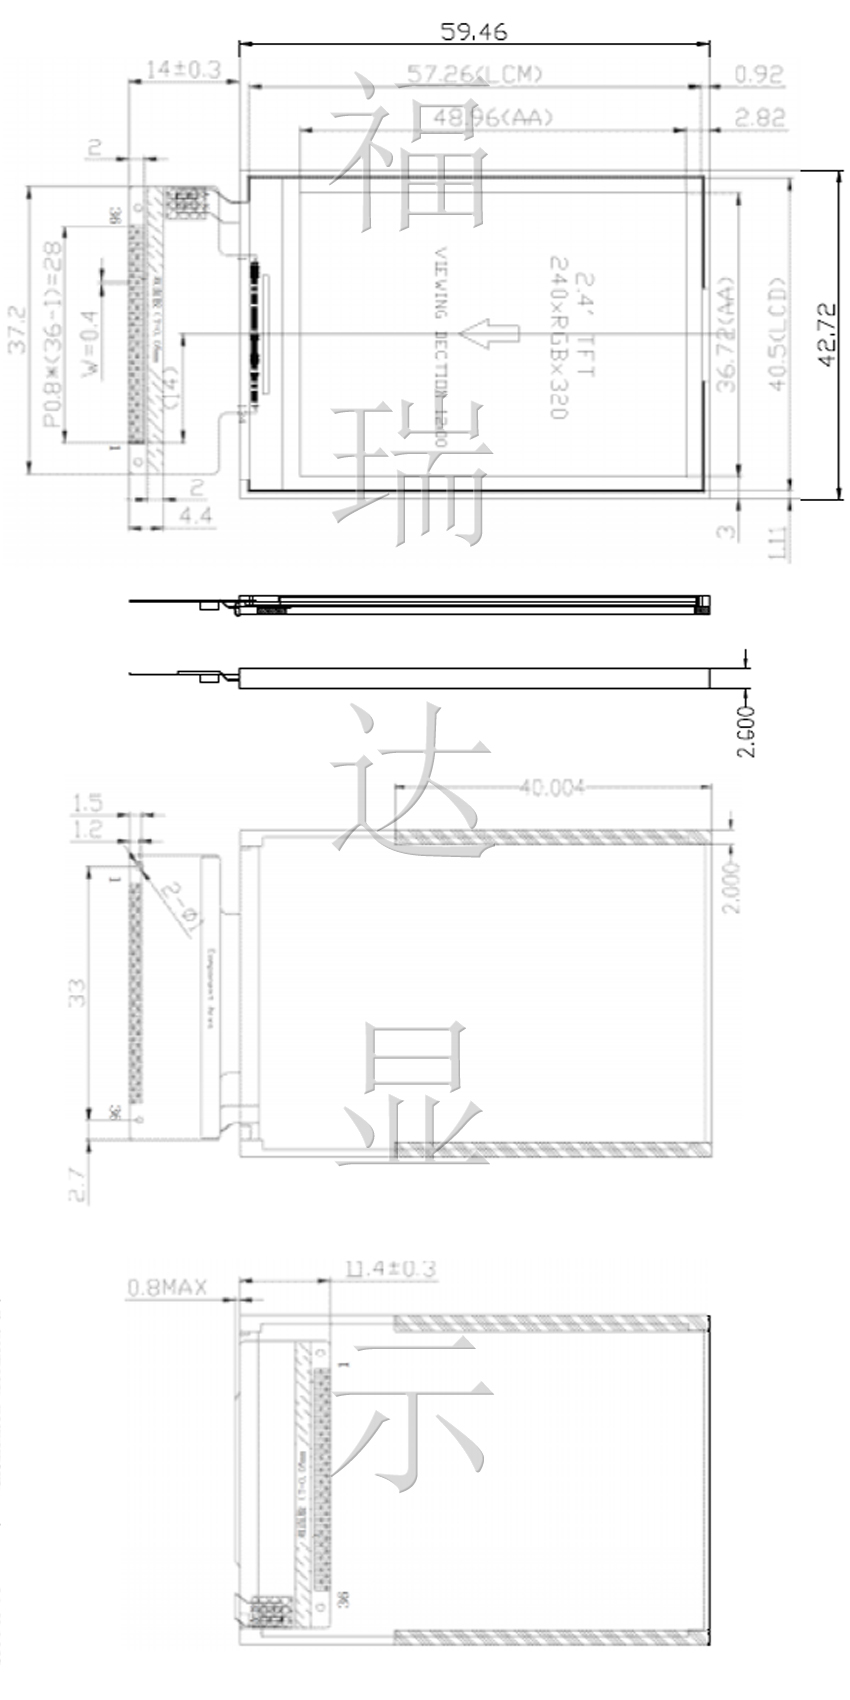 FRD-TFT-240A Outline dimension drawing